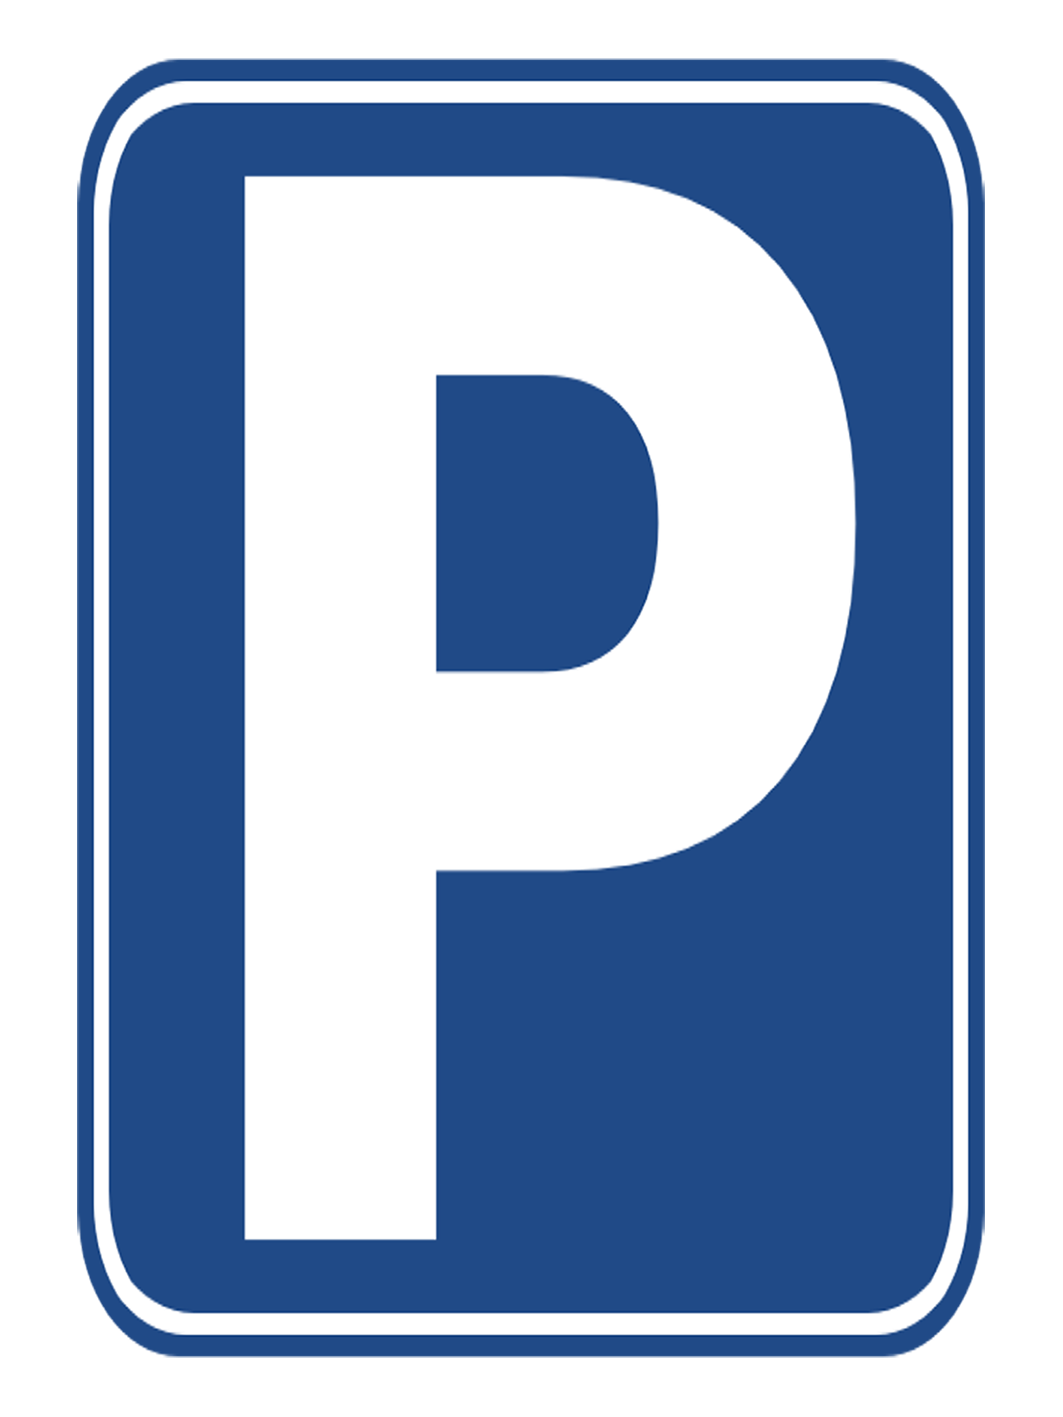 Parking at the cottage